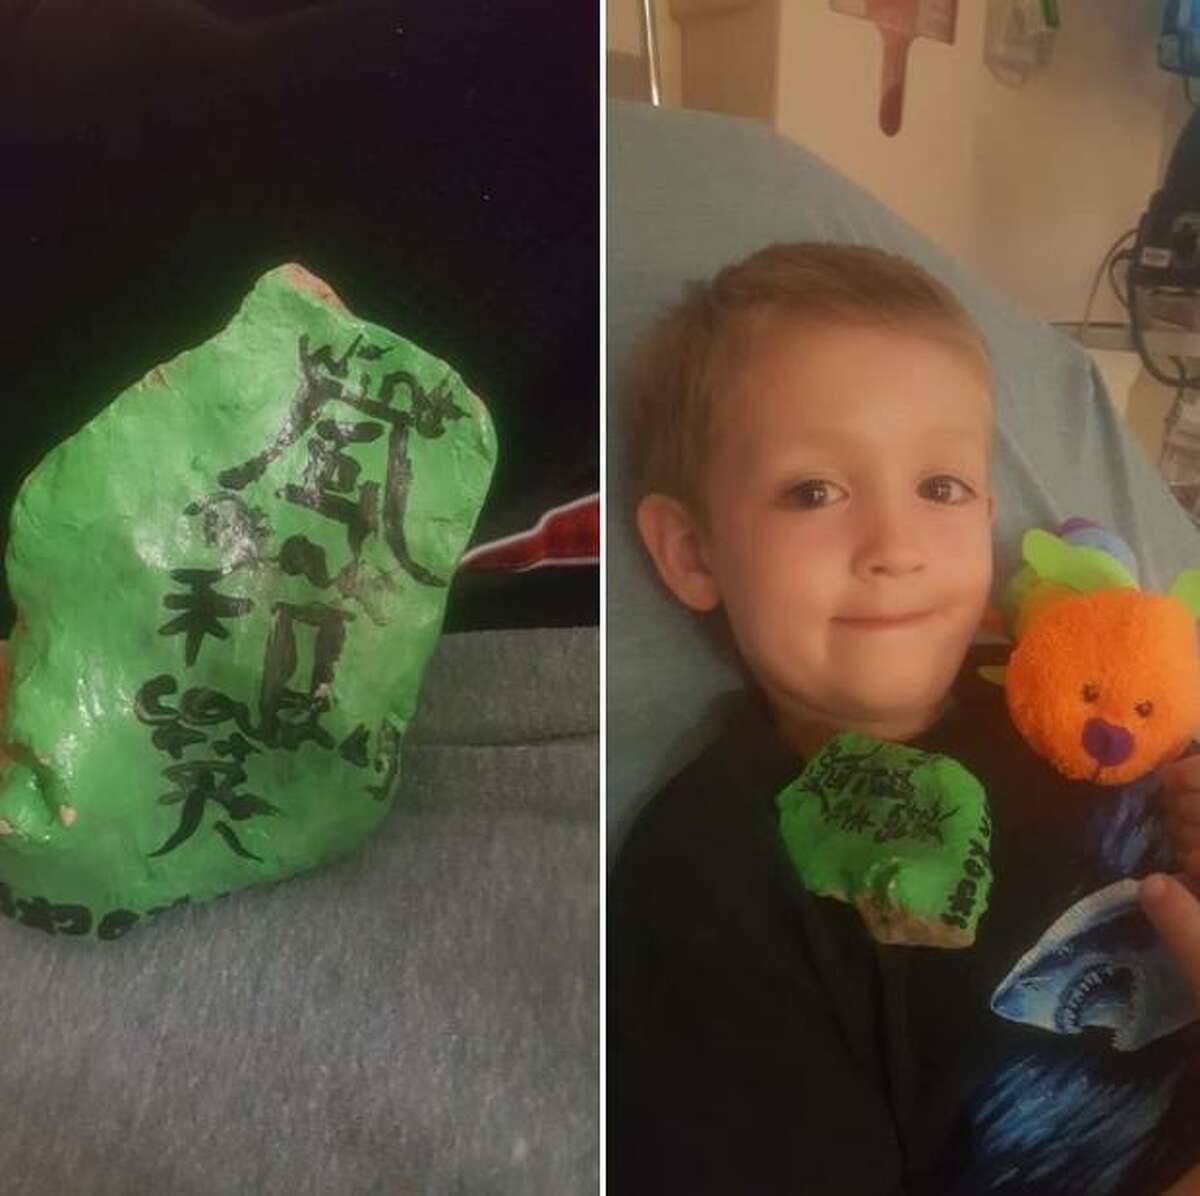 The found rocks of San Antonio Rocks can come with their own colorful stories. For instance, Elizabeth Sterns' seven-year-old son Jackson holds a painted rock while in an emergency room. The rock featured Japanese symbols with English words that included "courage," which Jackson said he needed.